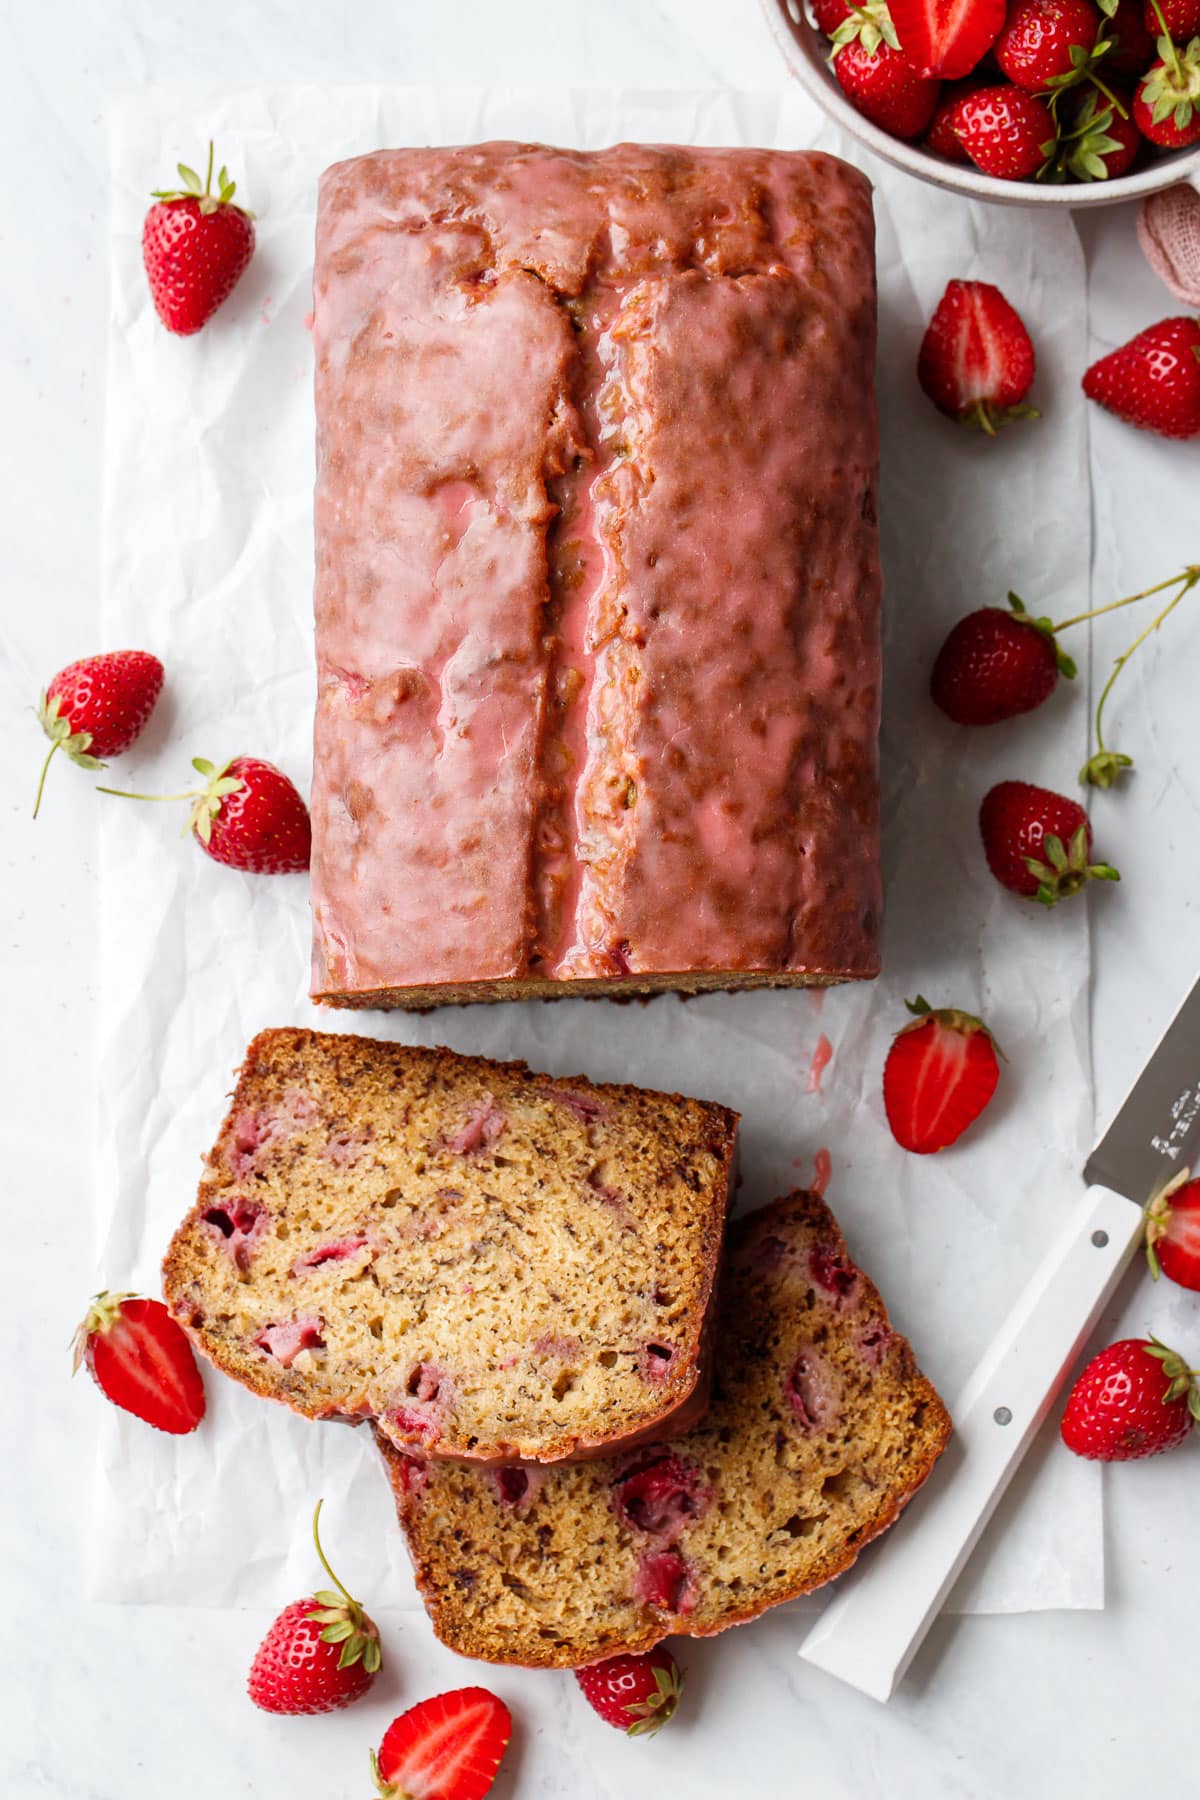 Overhead, loaf of Strawberry Banana Bread with two slices cut and laying down to show texture, scattered strawberries and a white knife on the side.